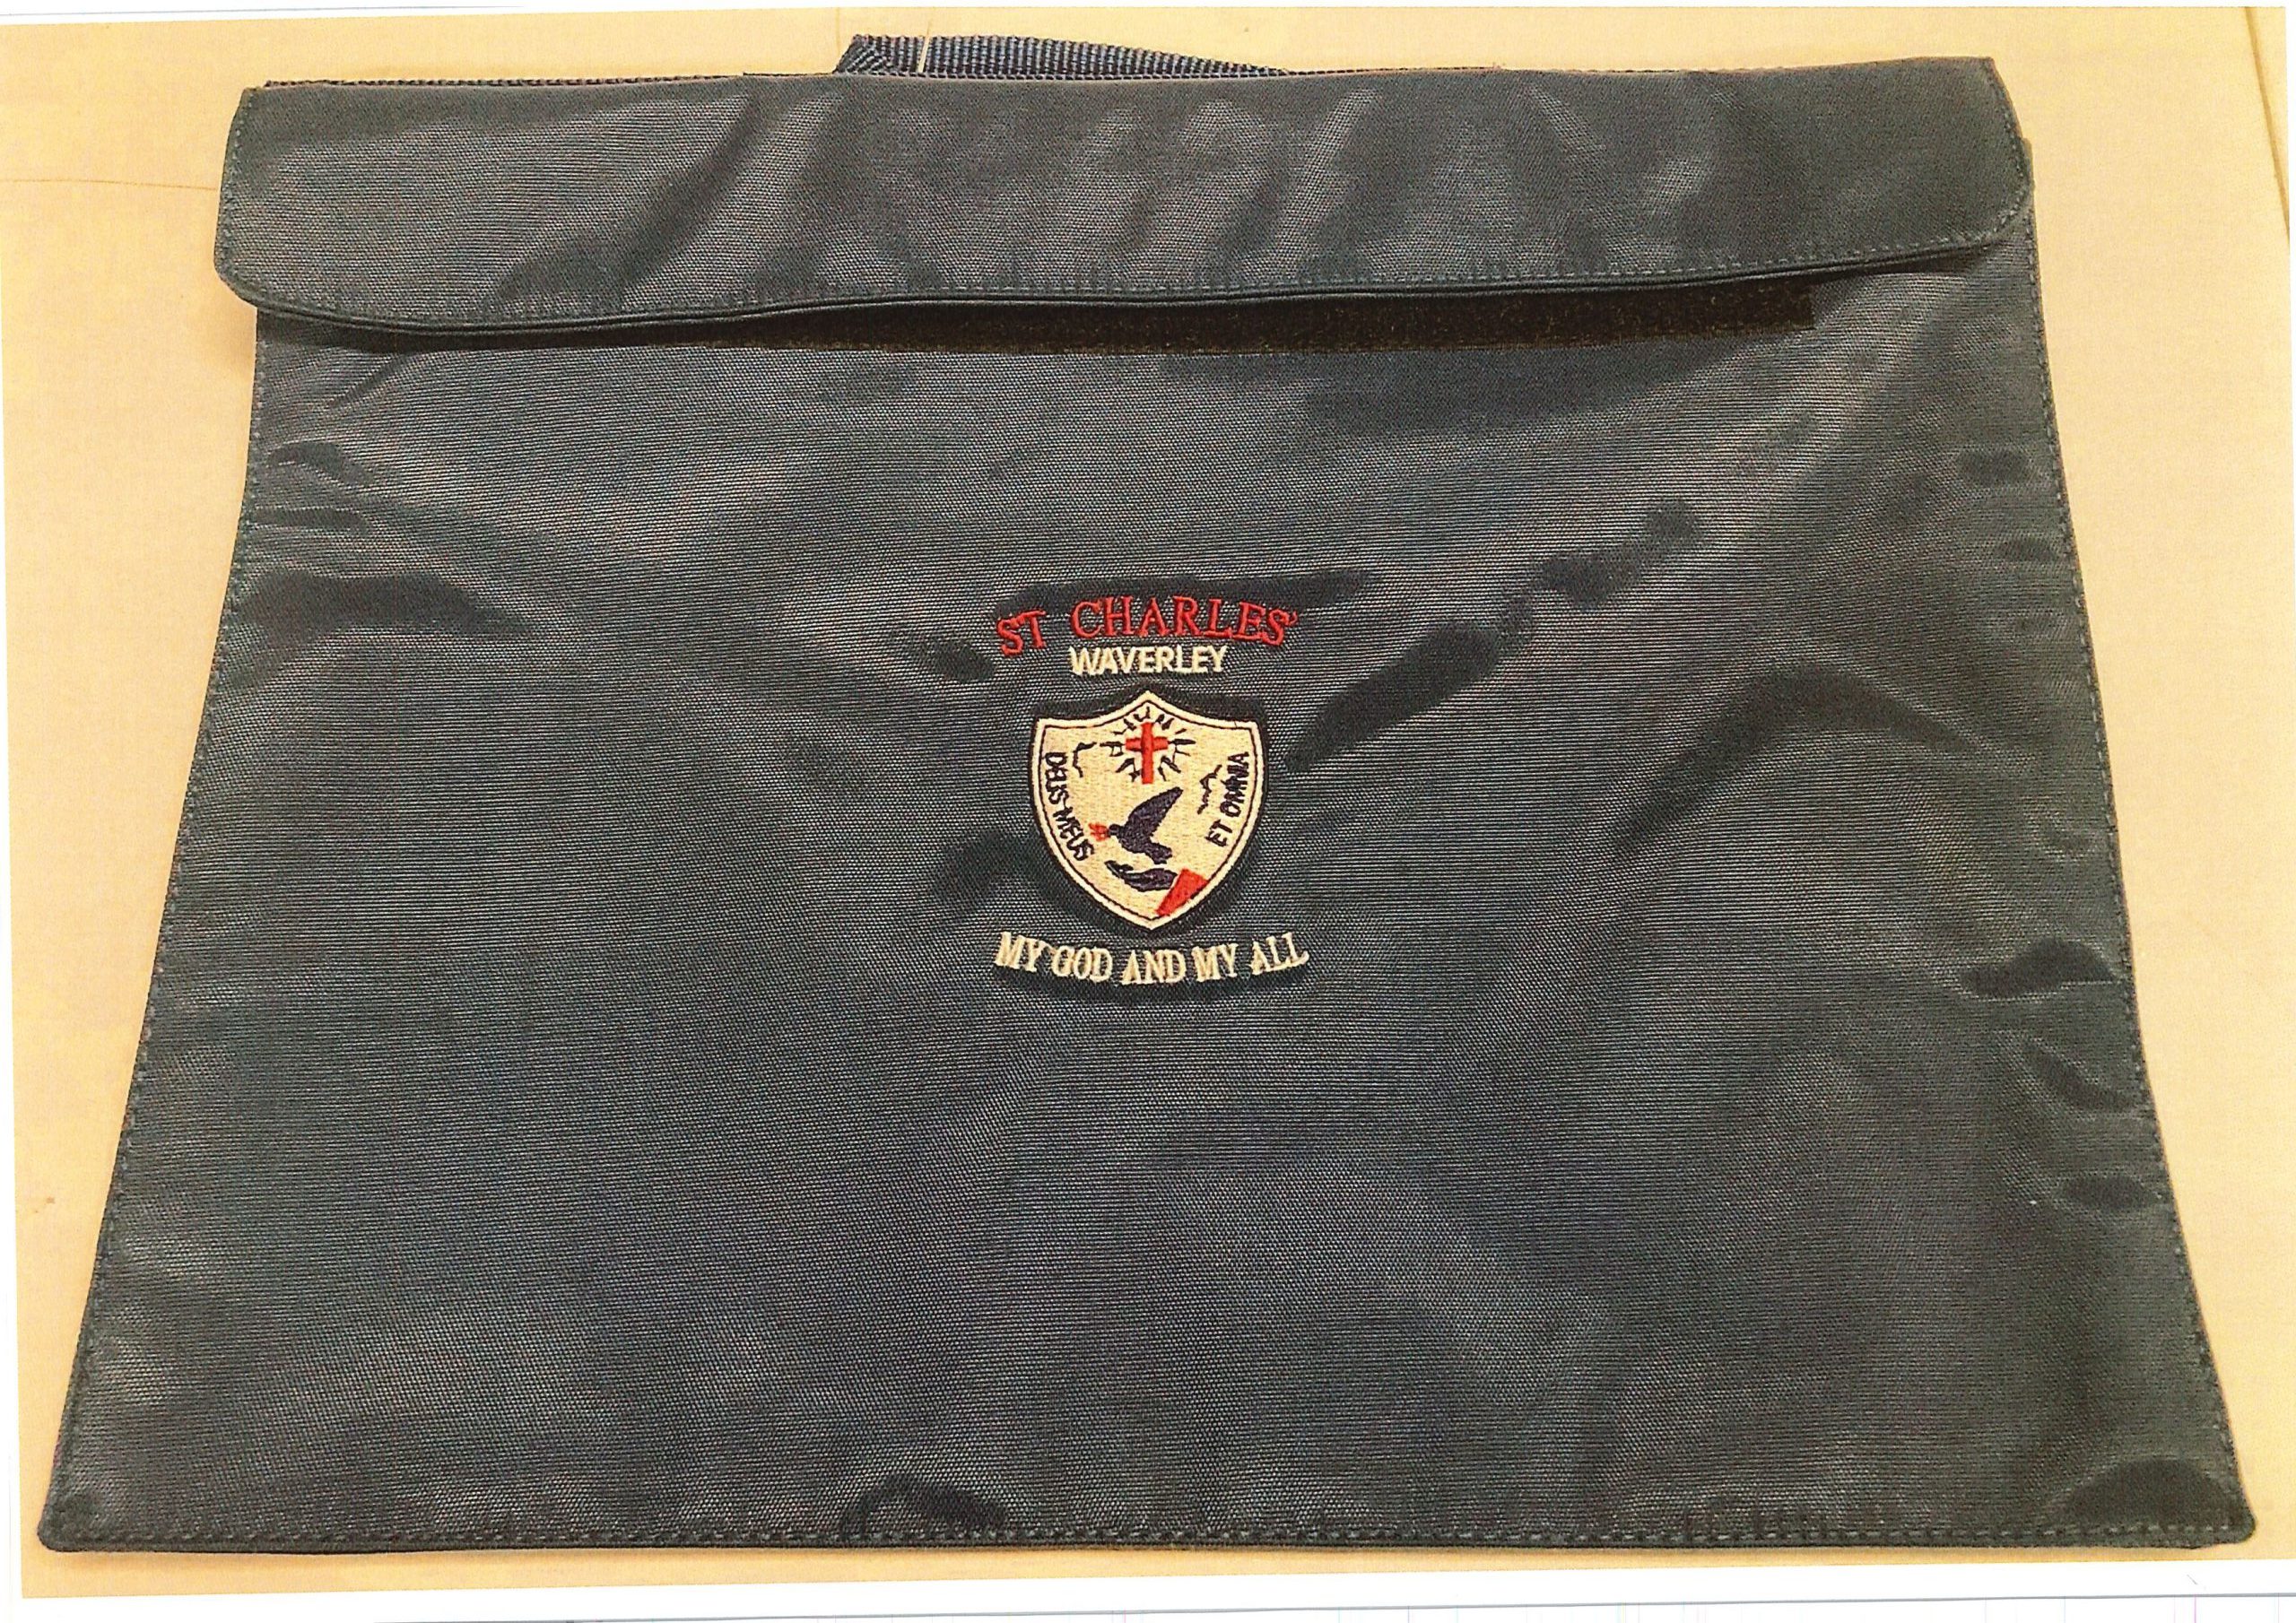 ST CHARLES LIBRARY BAG - Wileys Uniforms